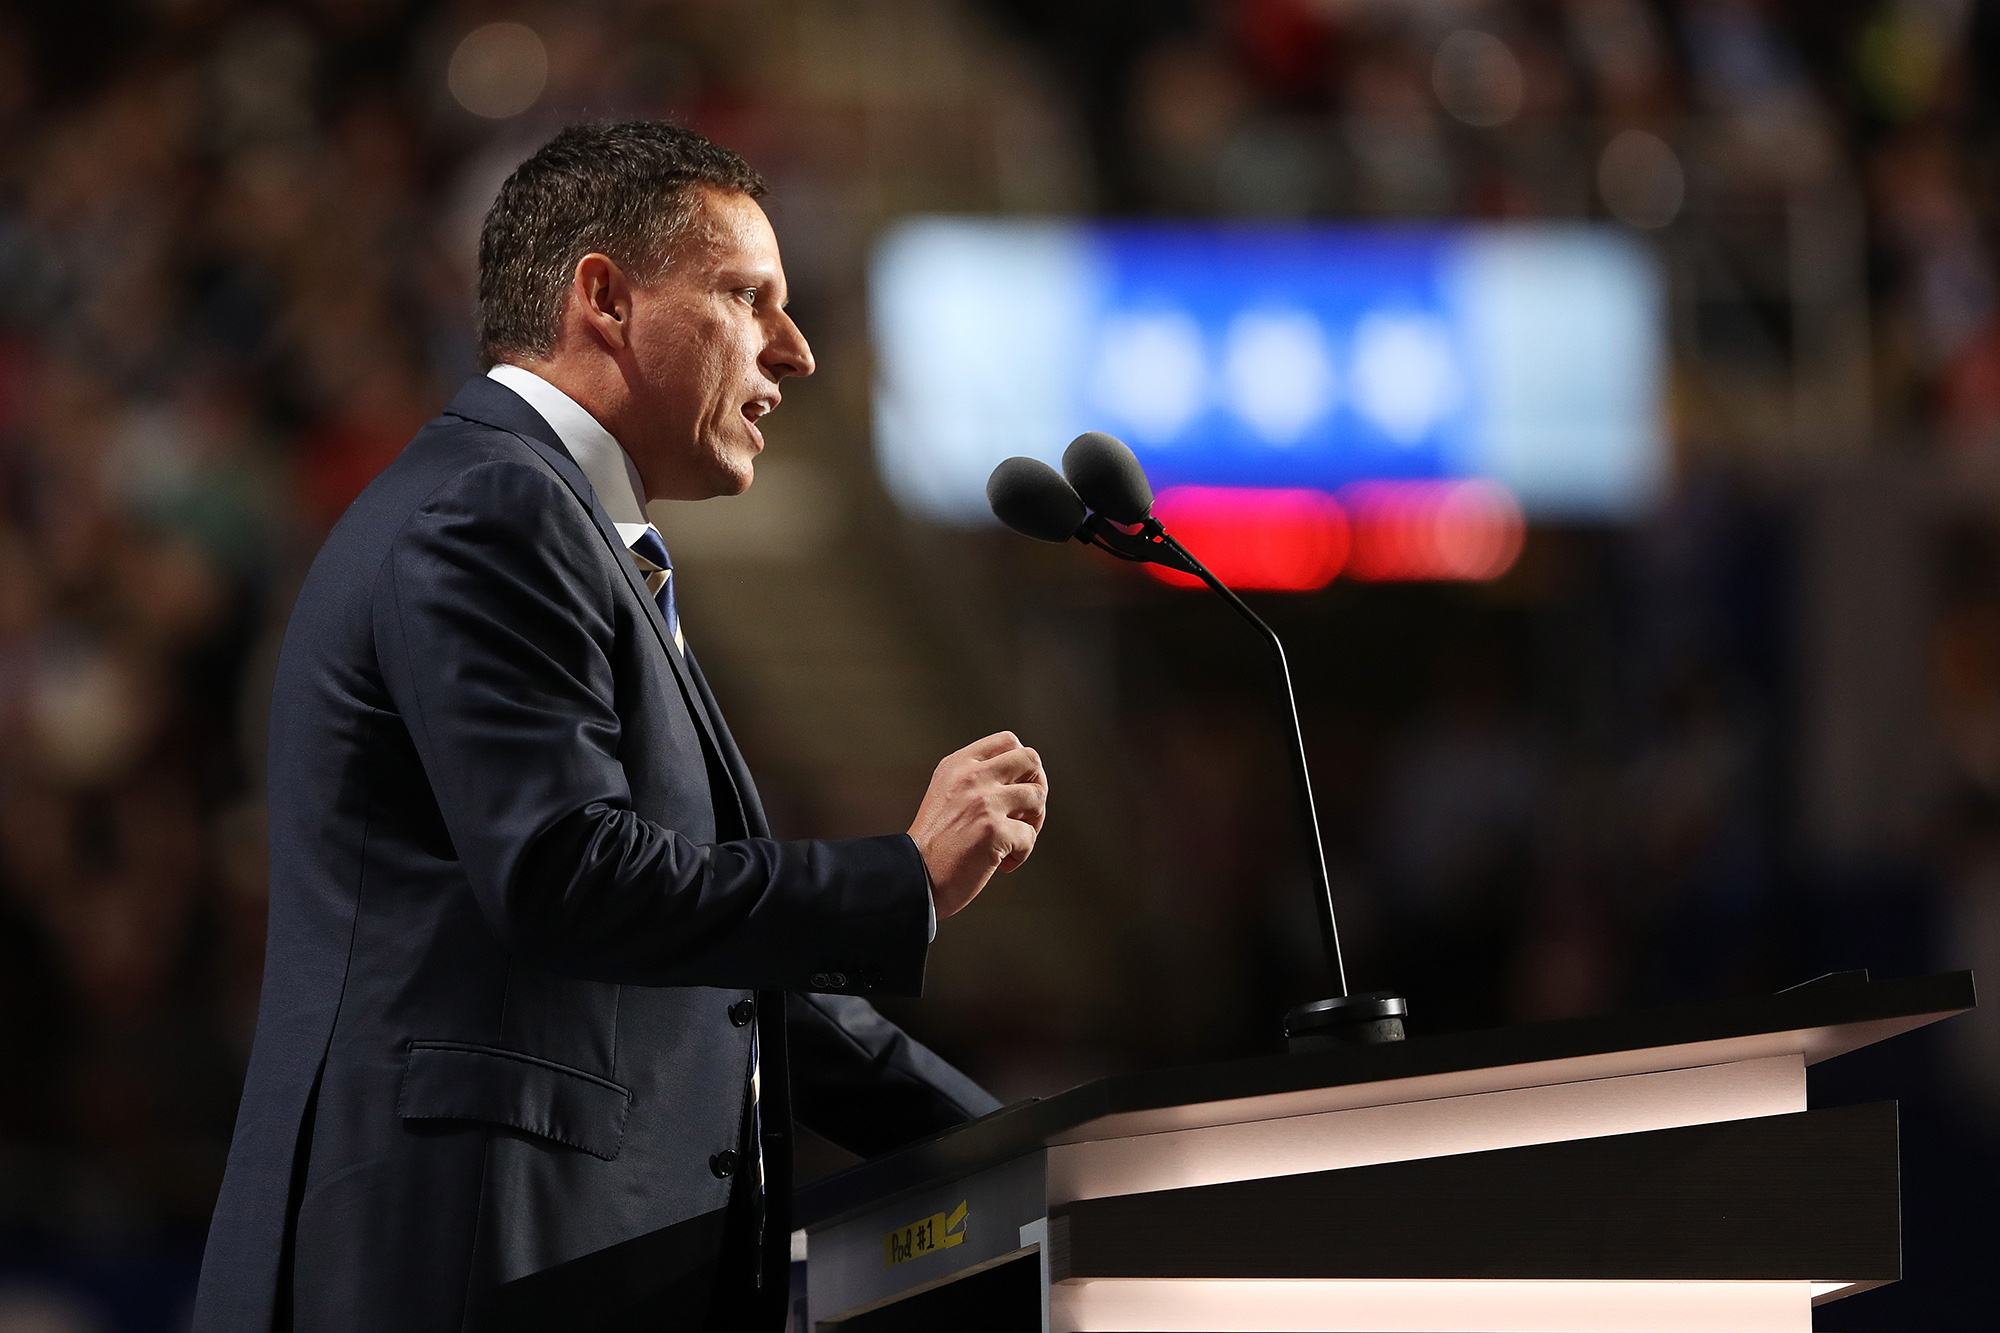 PHOTO: Peter Thiel, co-founder of PayPal, delivers a speech during the evening session on the last day of the Republican National Convention on July 21, 2016 in Cleveland.